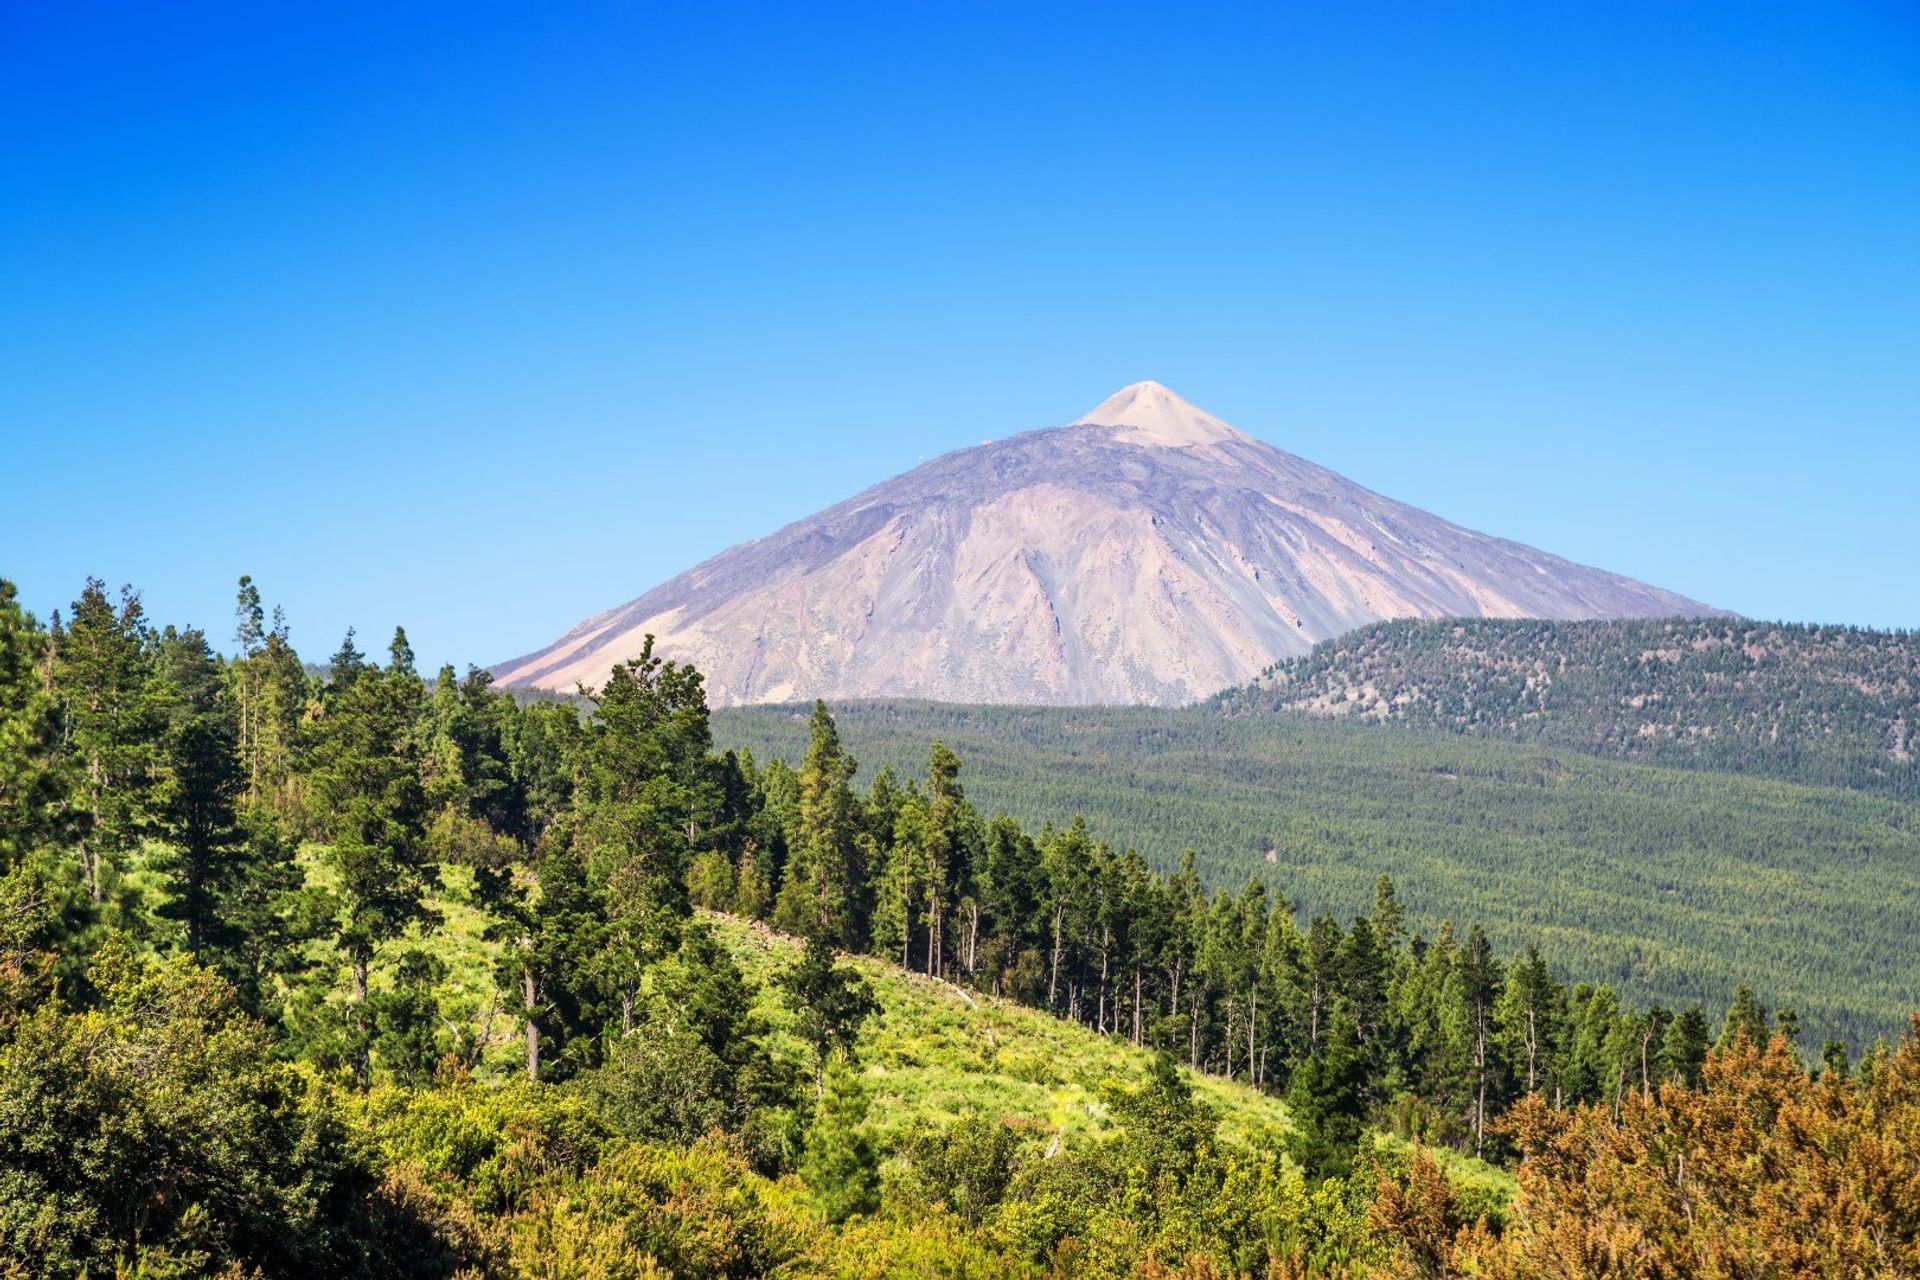 Teide National Park, a UNESCO World Heritage Site and the biggest in the Canary Islands